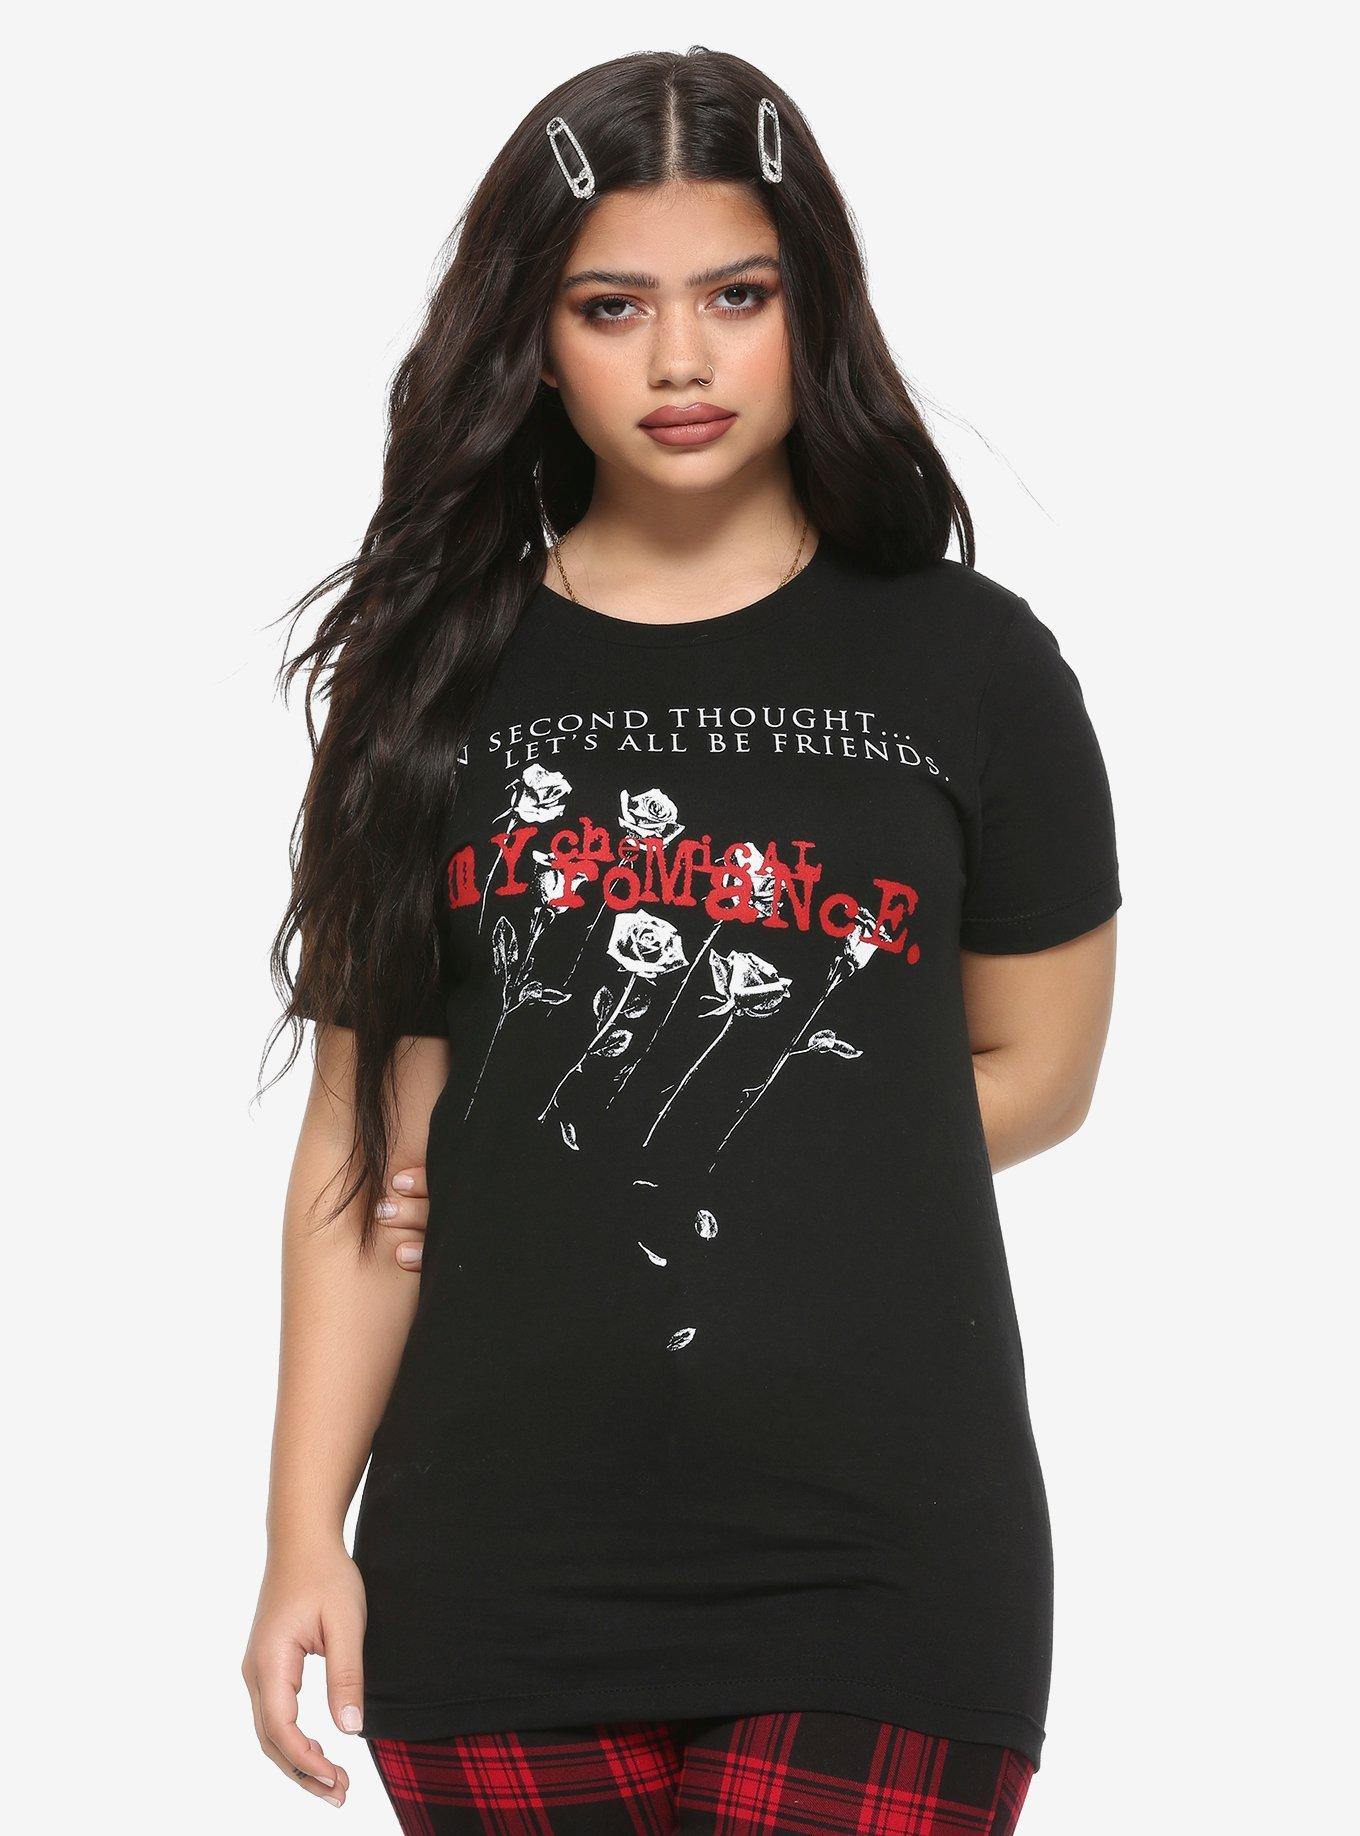 My Chemical Romance Let's All Be Friends Girls T-Shirt, BLACK, hi-res